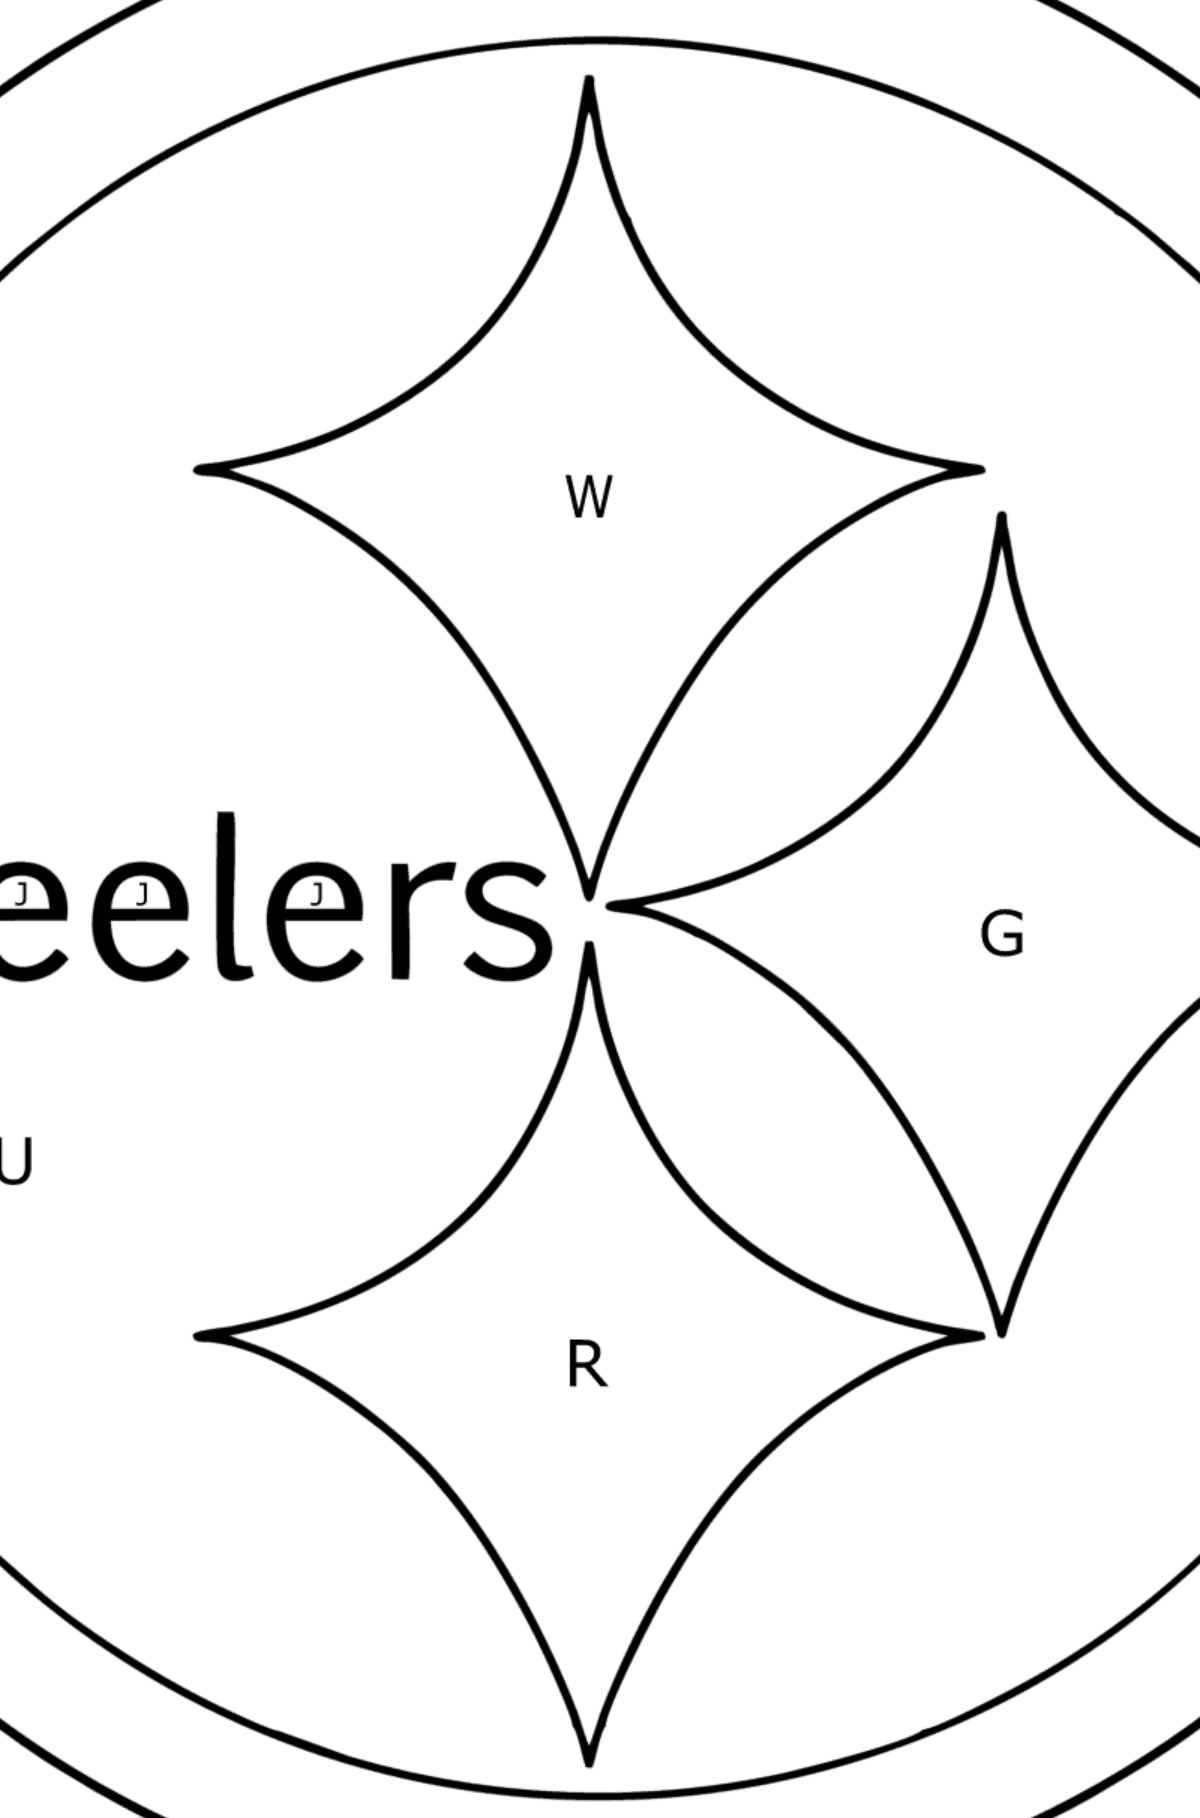 NFL Pittsburgh Steelers сoloring page - Coloring by Letters for Kids